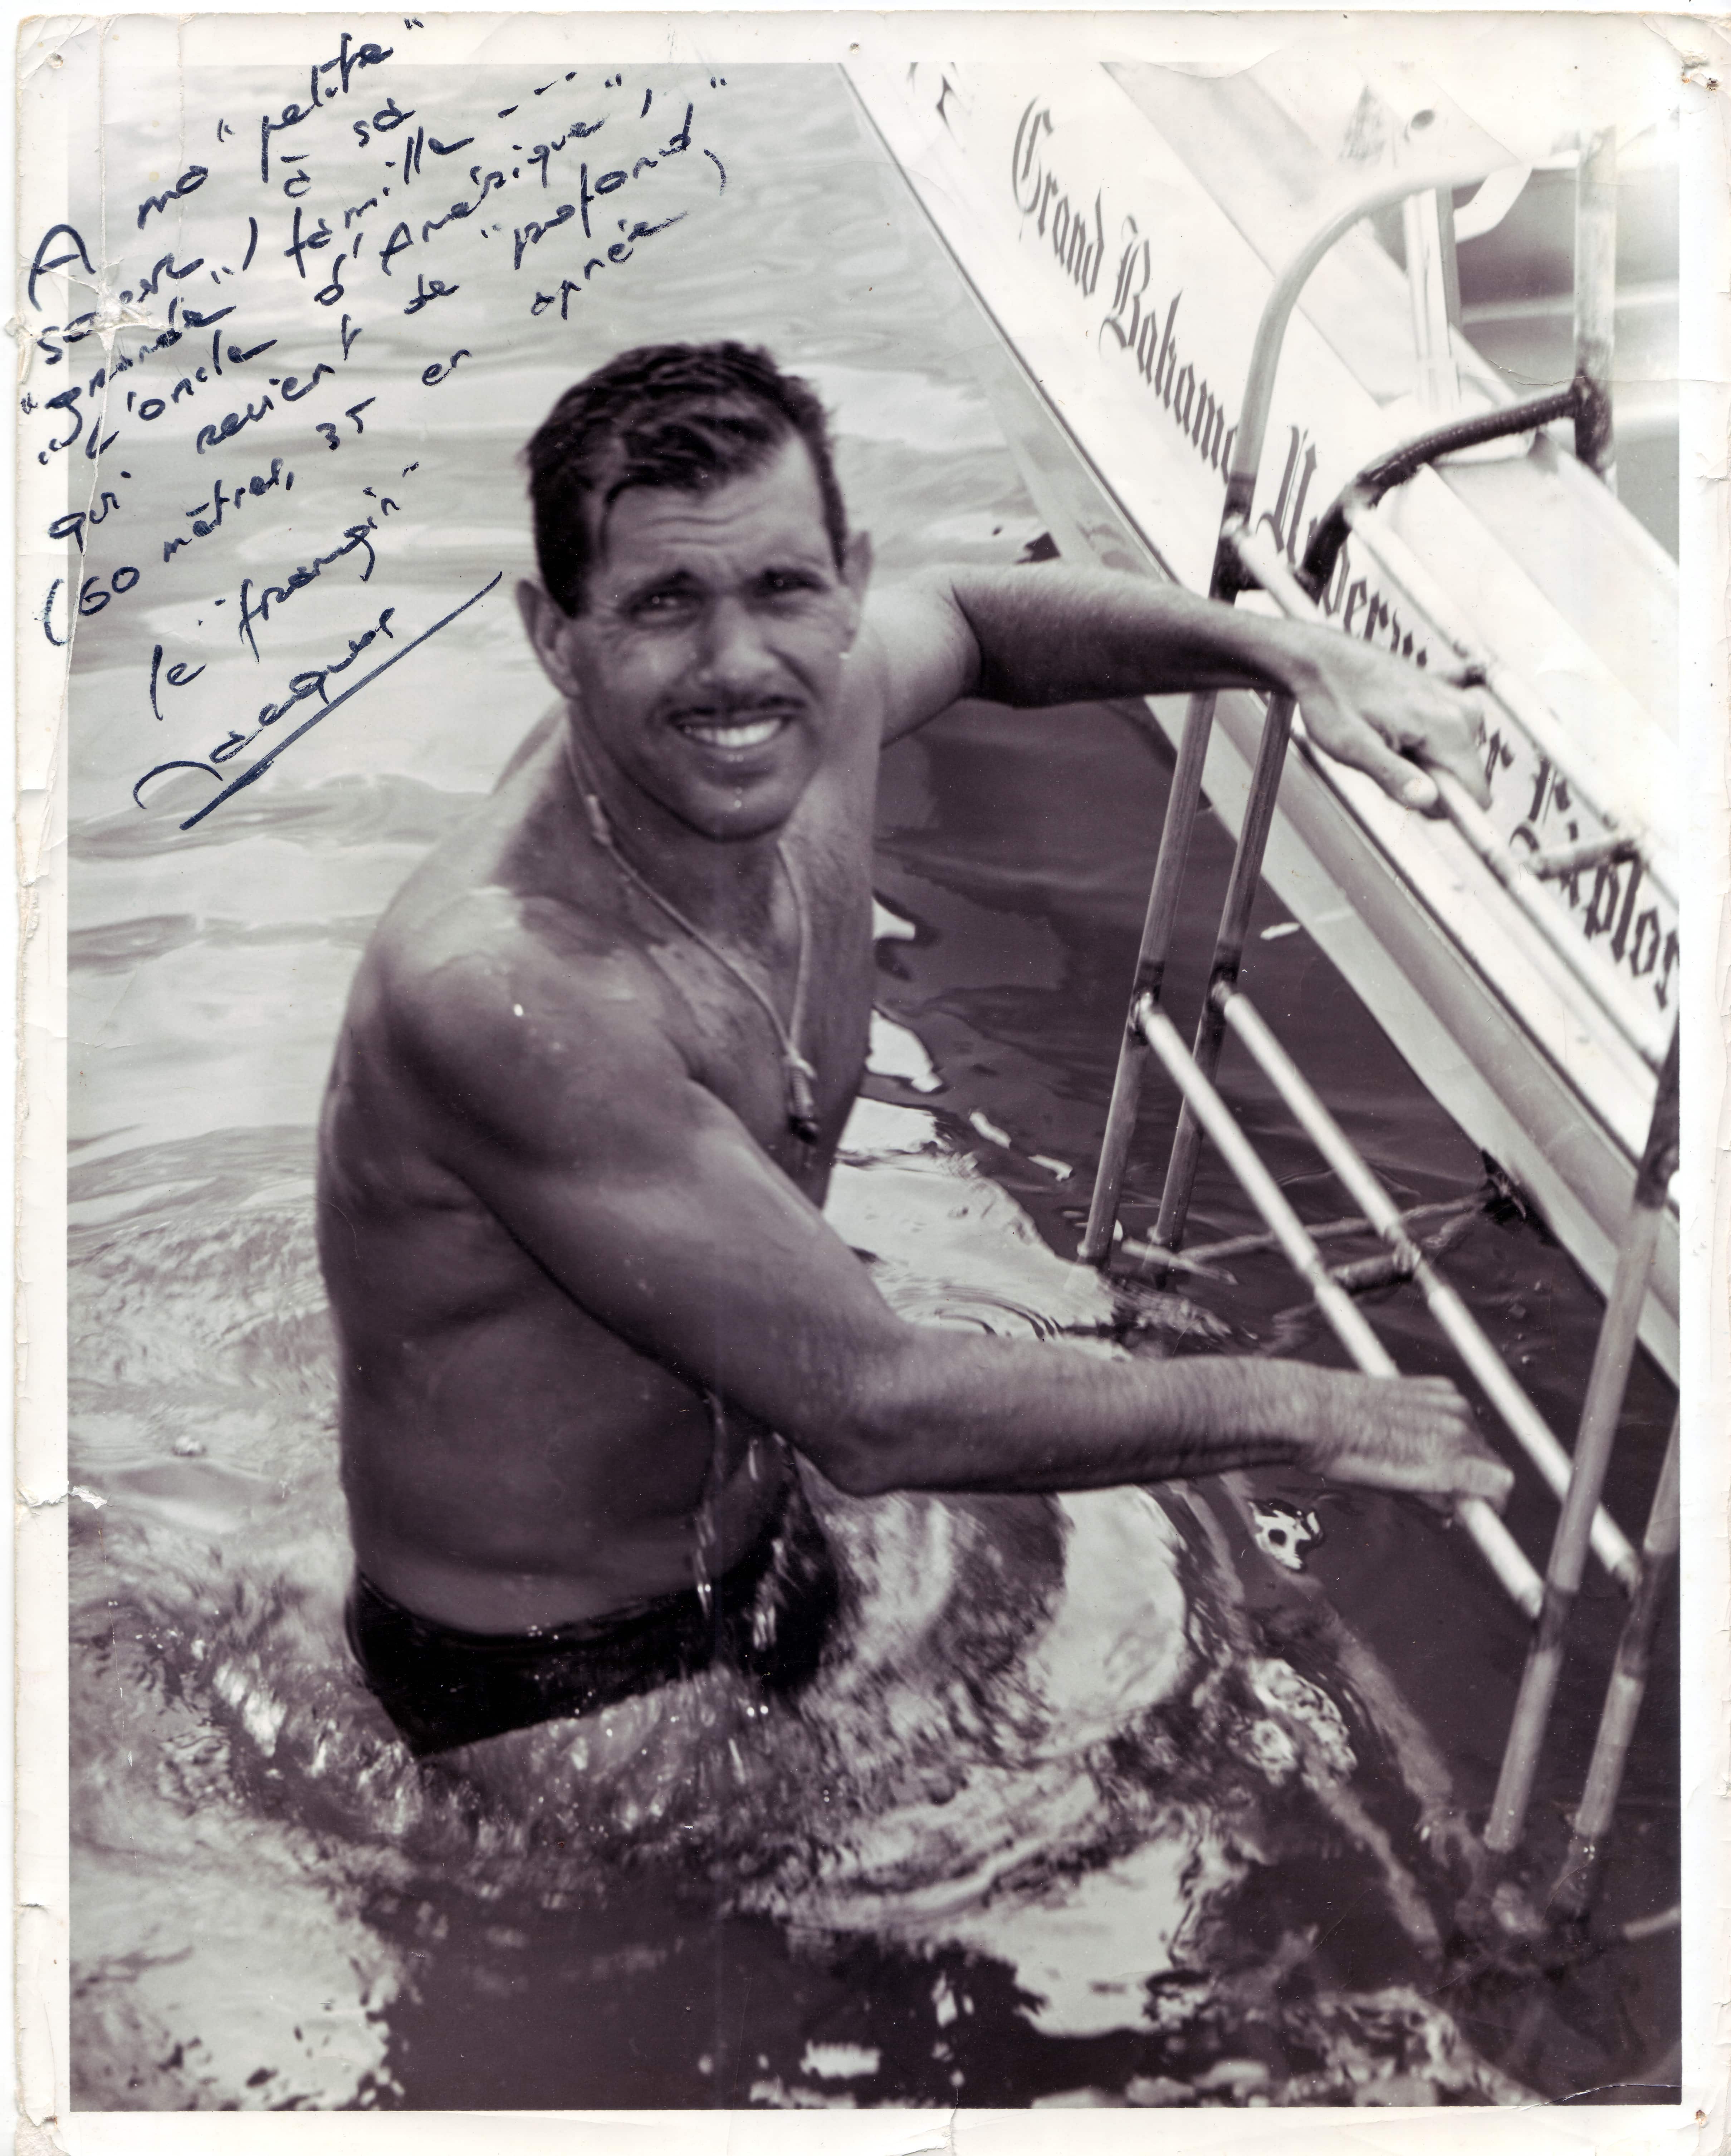 Jacques Mayol 1960s.jpg